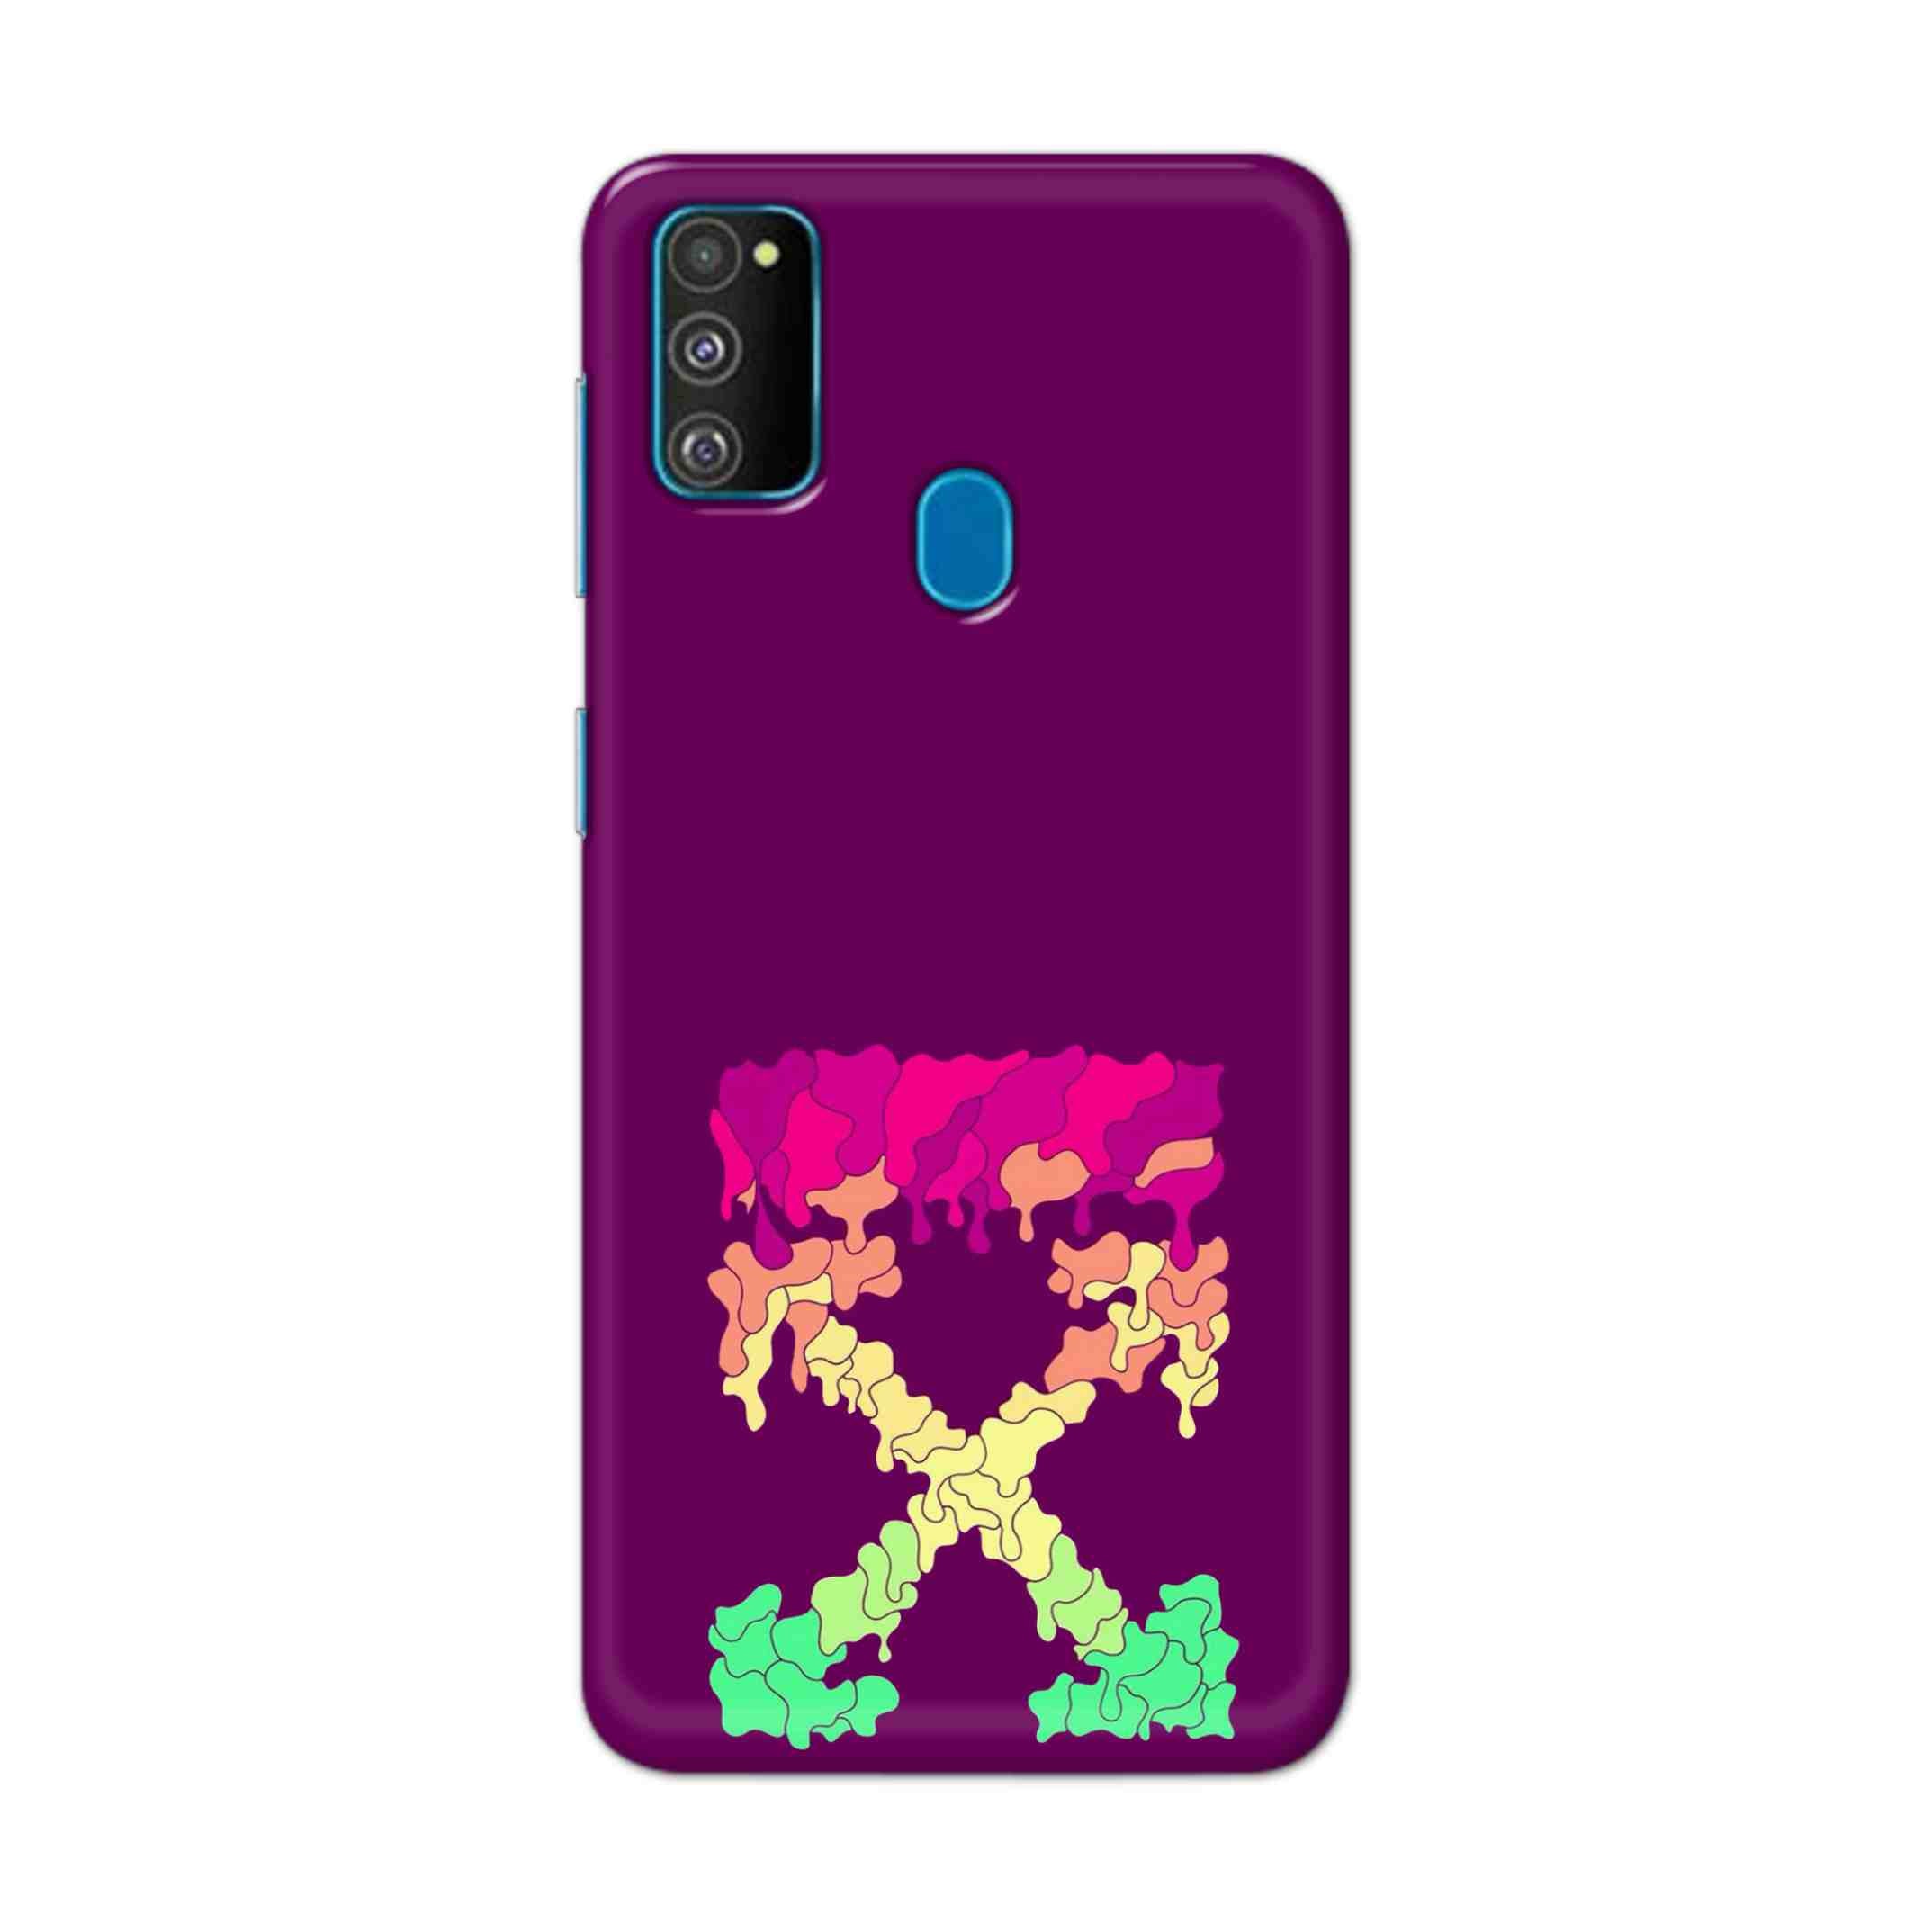 Buy X.O Hard Back Mobile Phone Case Cover For Samsung Galaxy M30s Online